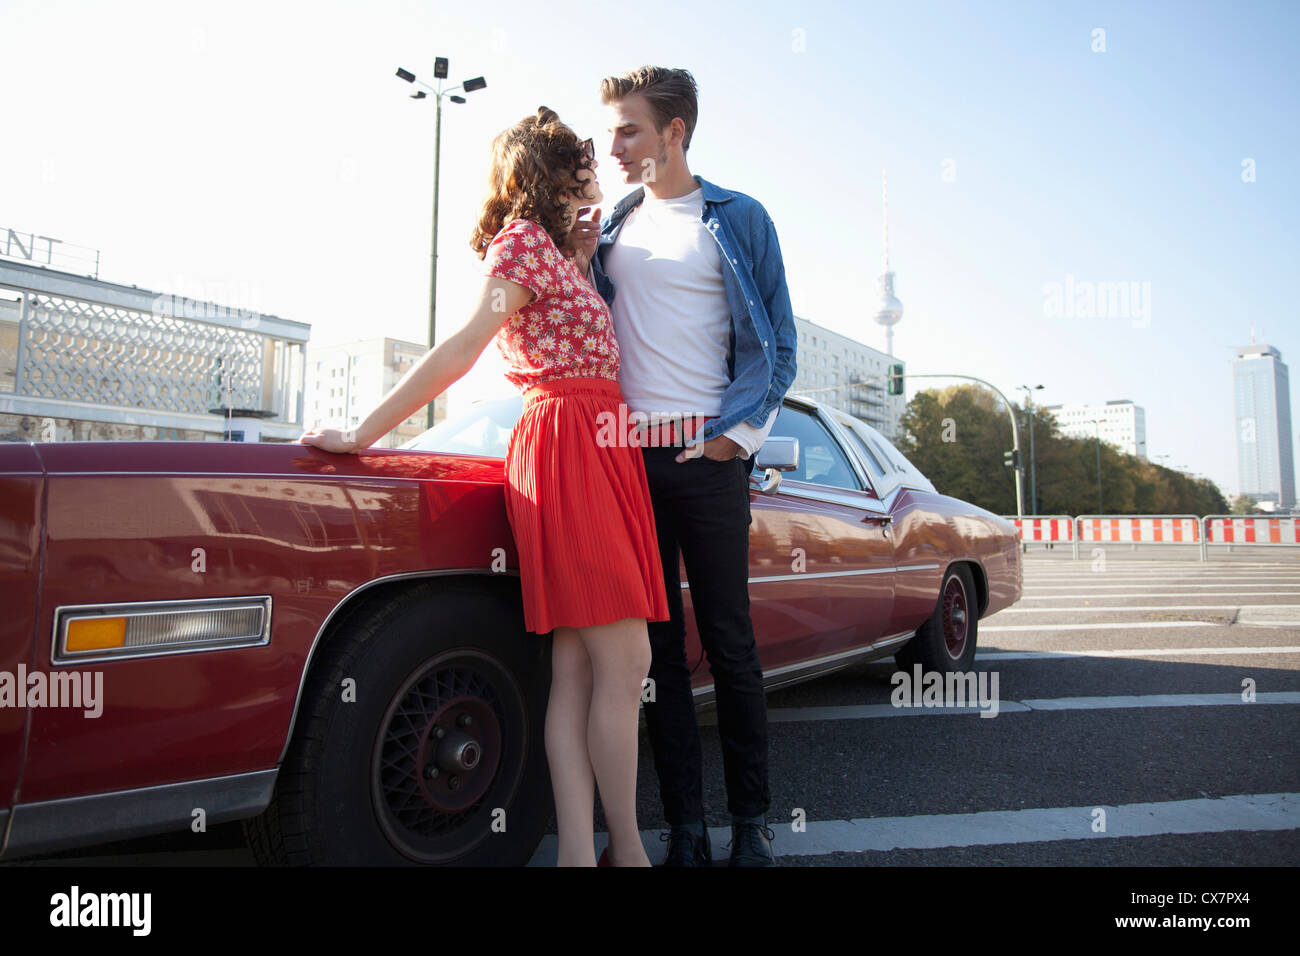 A flirtatious rockabilly couple standing next to a vintage car, Berlin, Germany Stock Photo